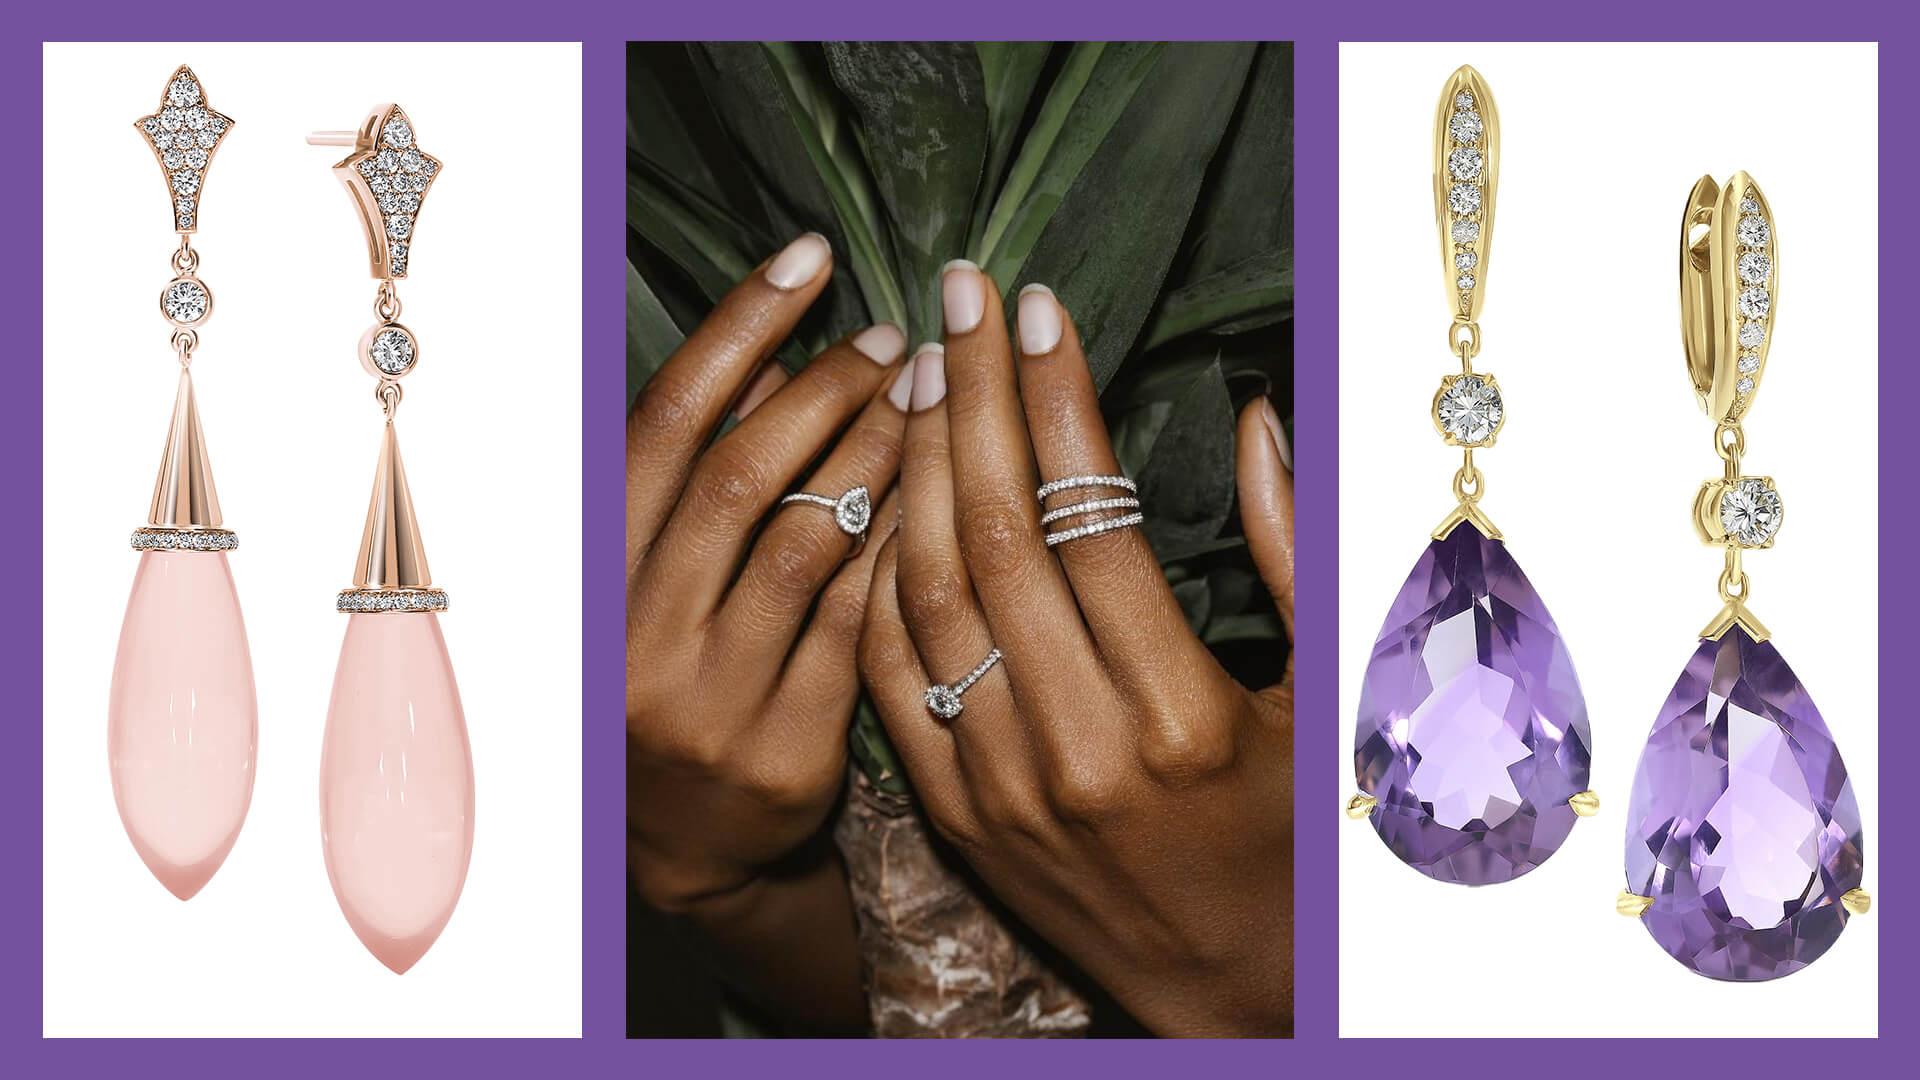 Budrevich jewellery. The images in college with a purple background. The left image is pink drop earrings. The middle image is a closeup of hands modelling diamond rings. The right image is a pair of purple drop earrings